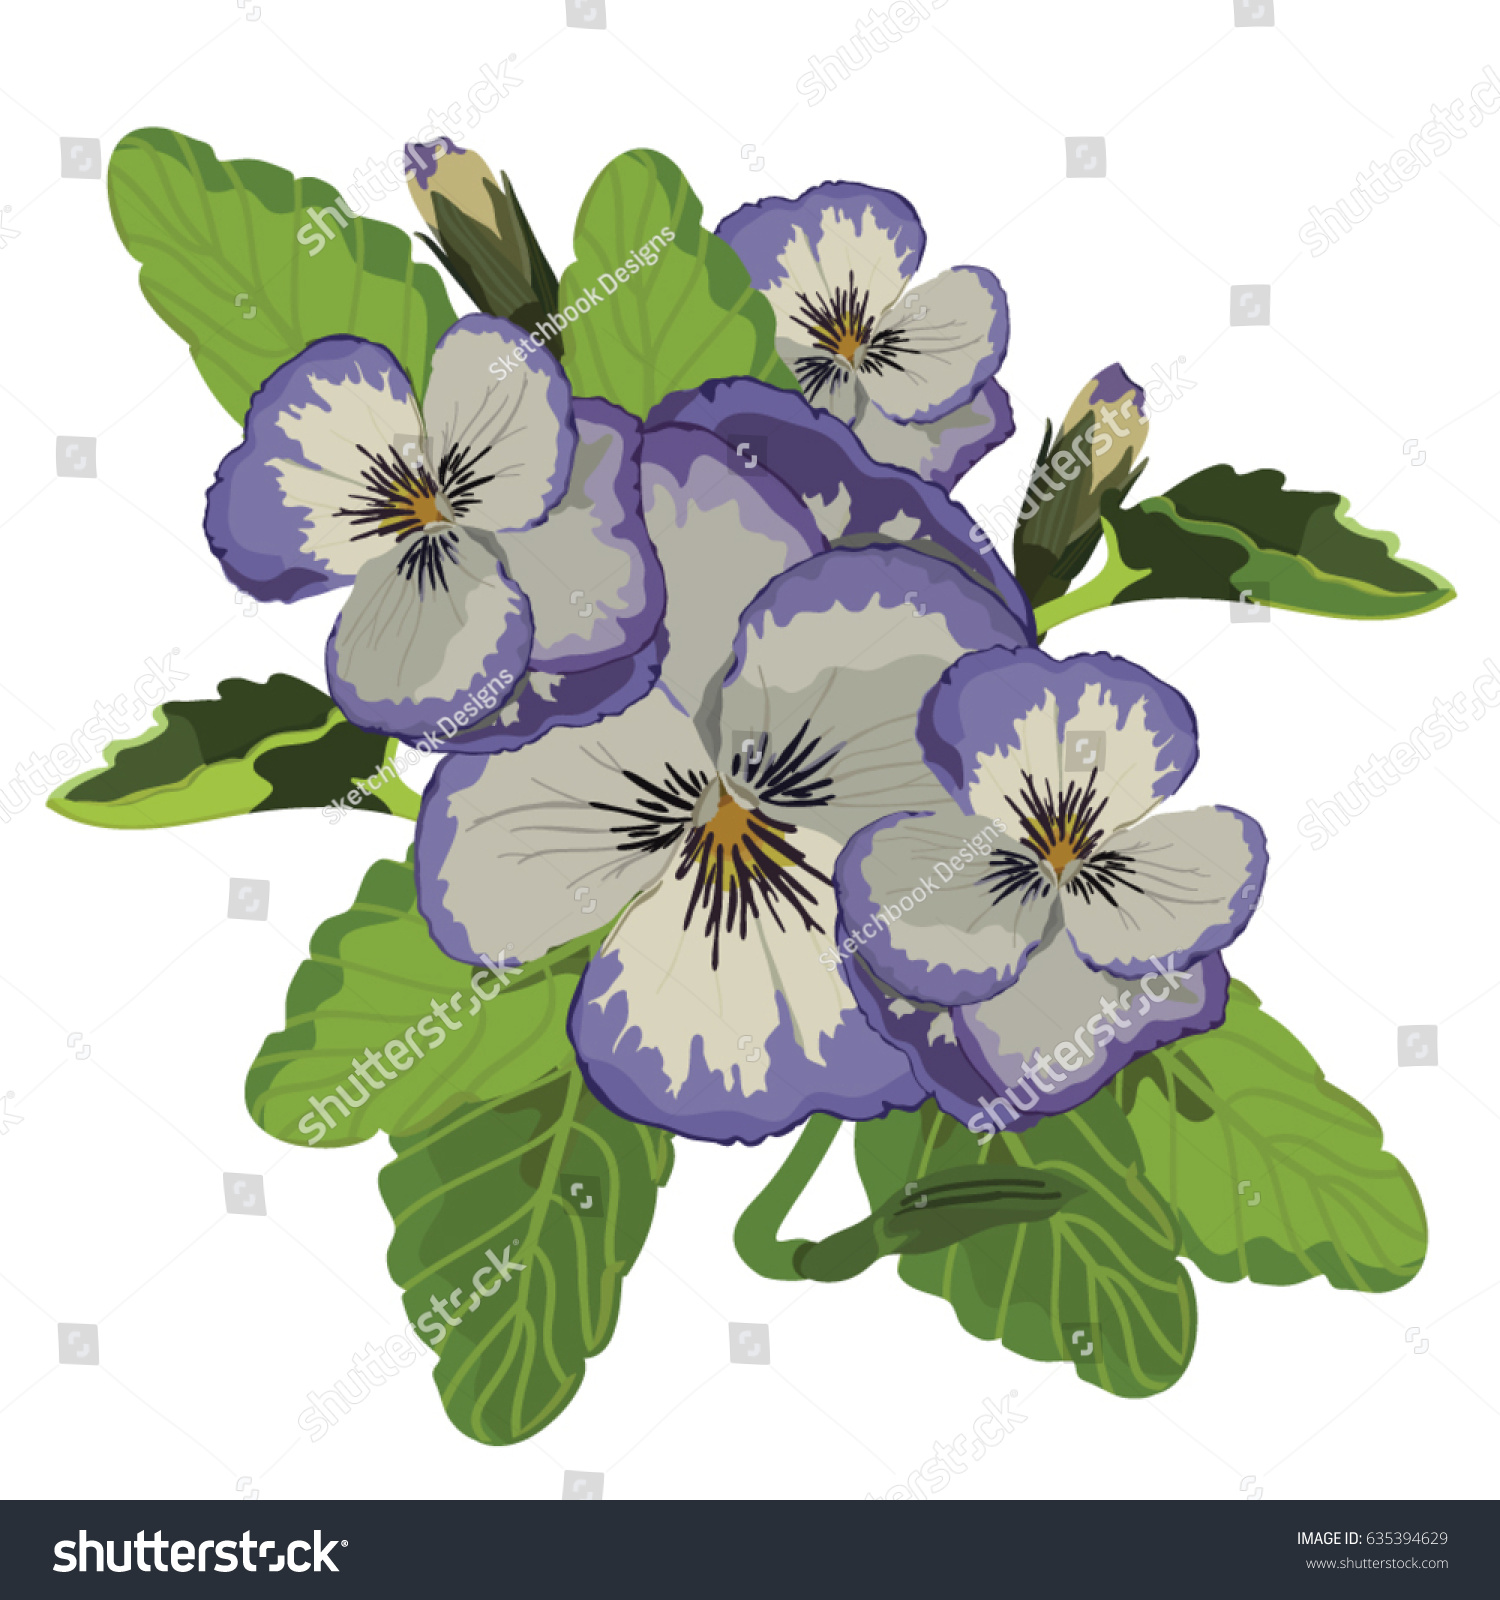 Realistic Purple Pansy Flower Bouquet Isolated Stock Vector Royalty Free 635394629